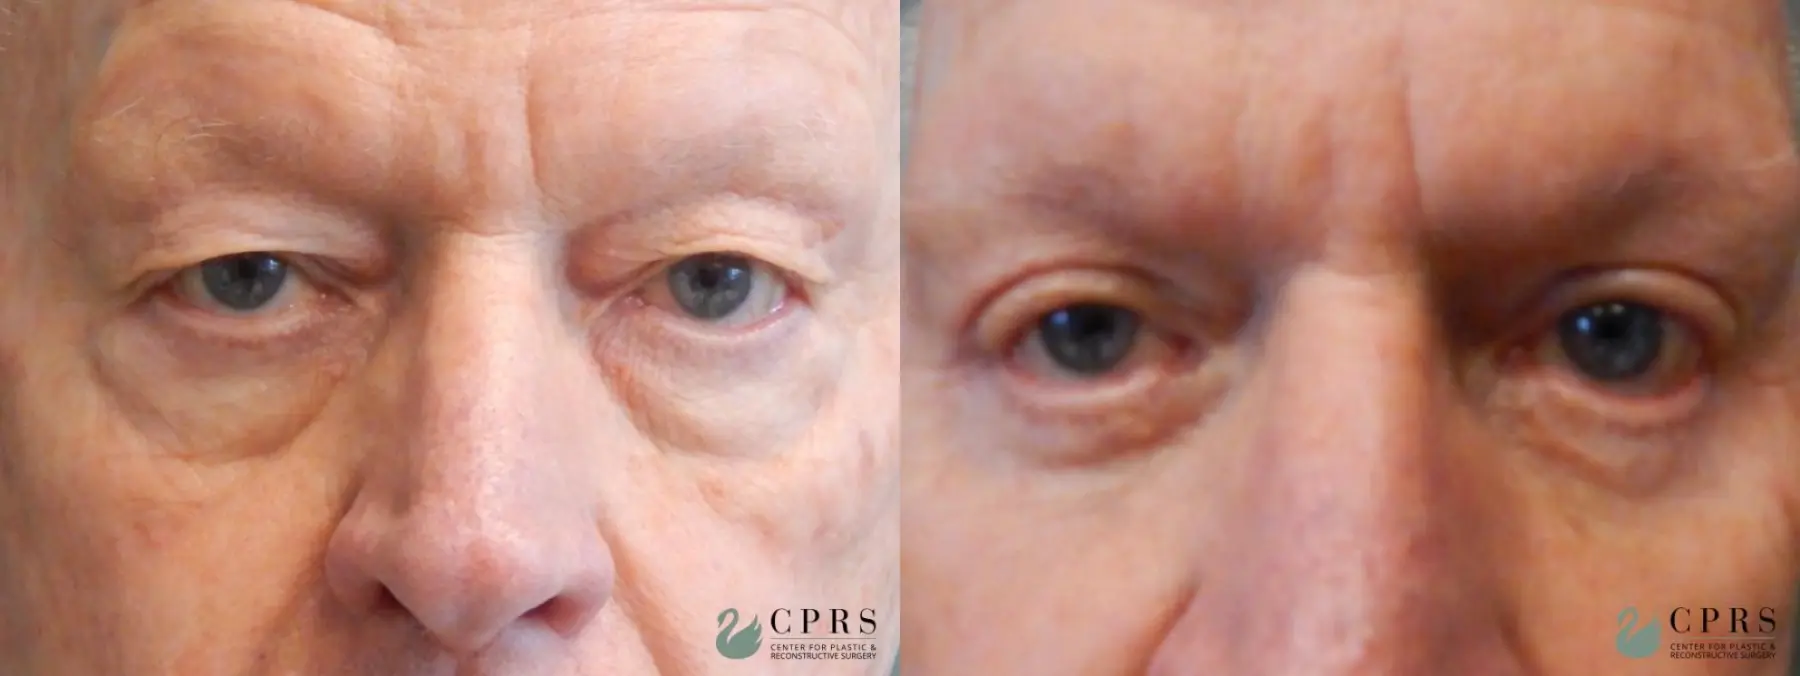 Blepharoplasty: Patient 9 - Before and After  